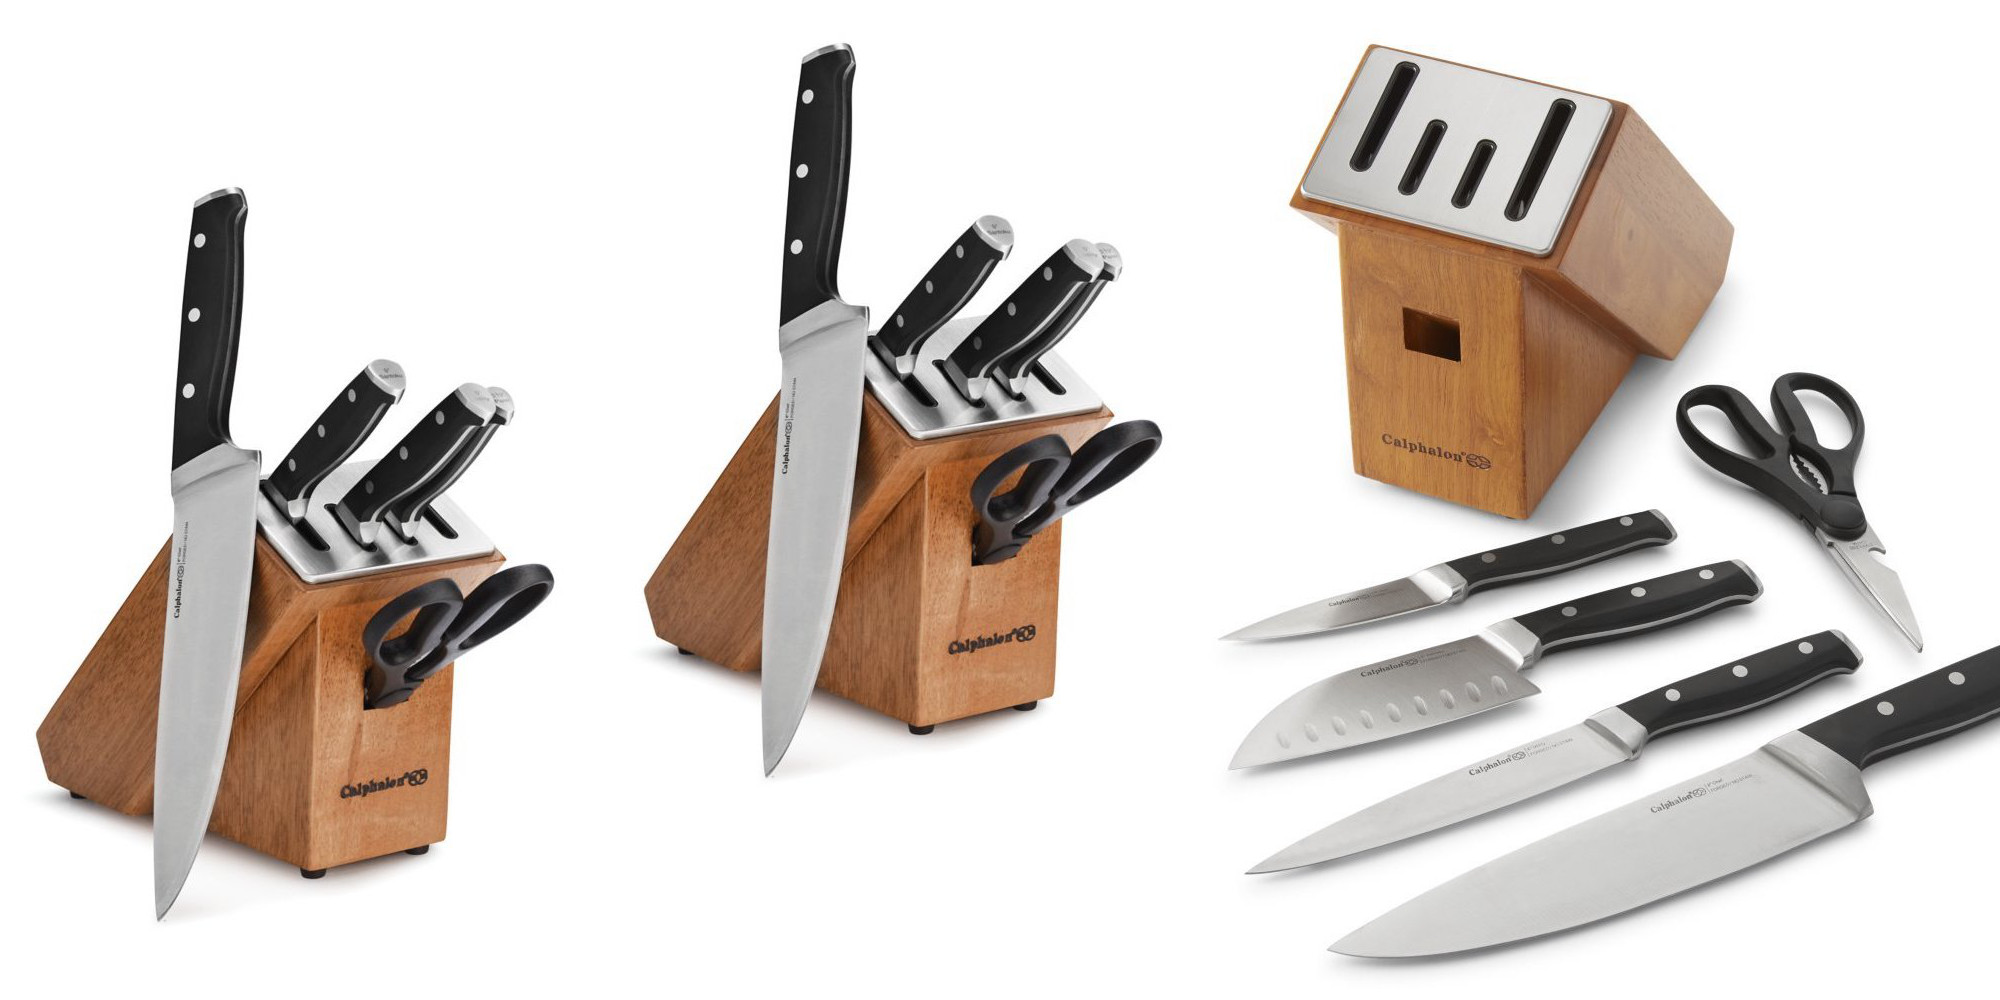 This Calphalon 6-piece knife set sharpens your blades for you: $50 (Reg.  $88+)